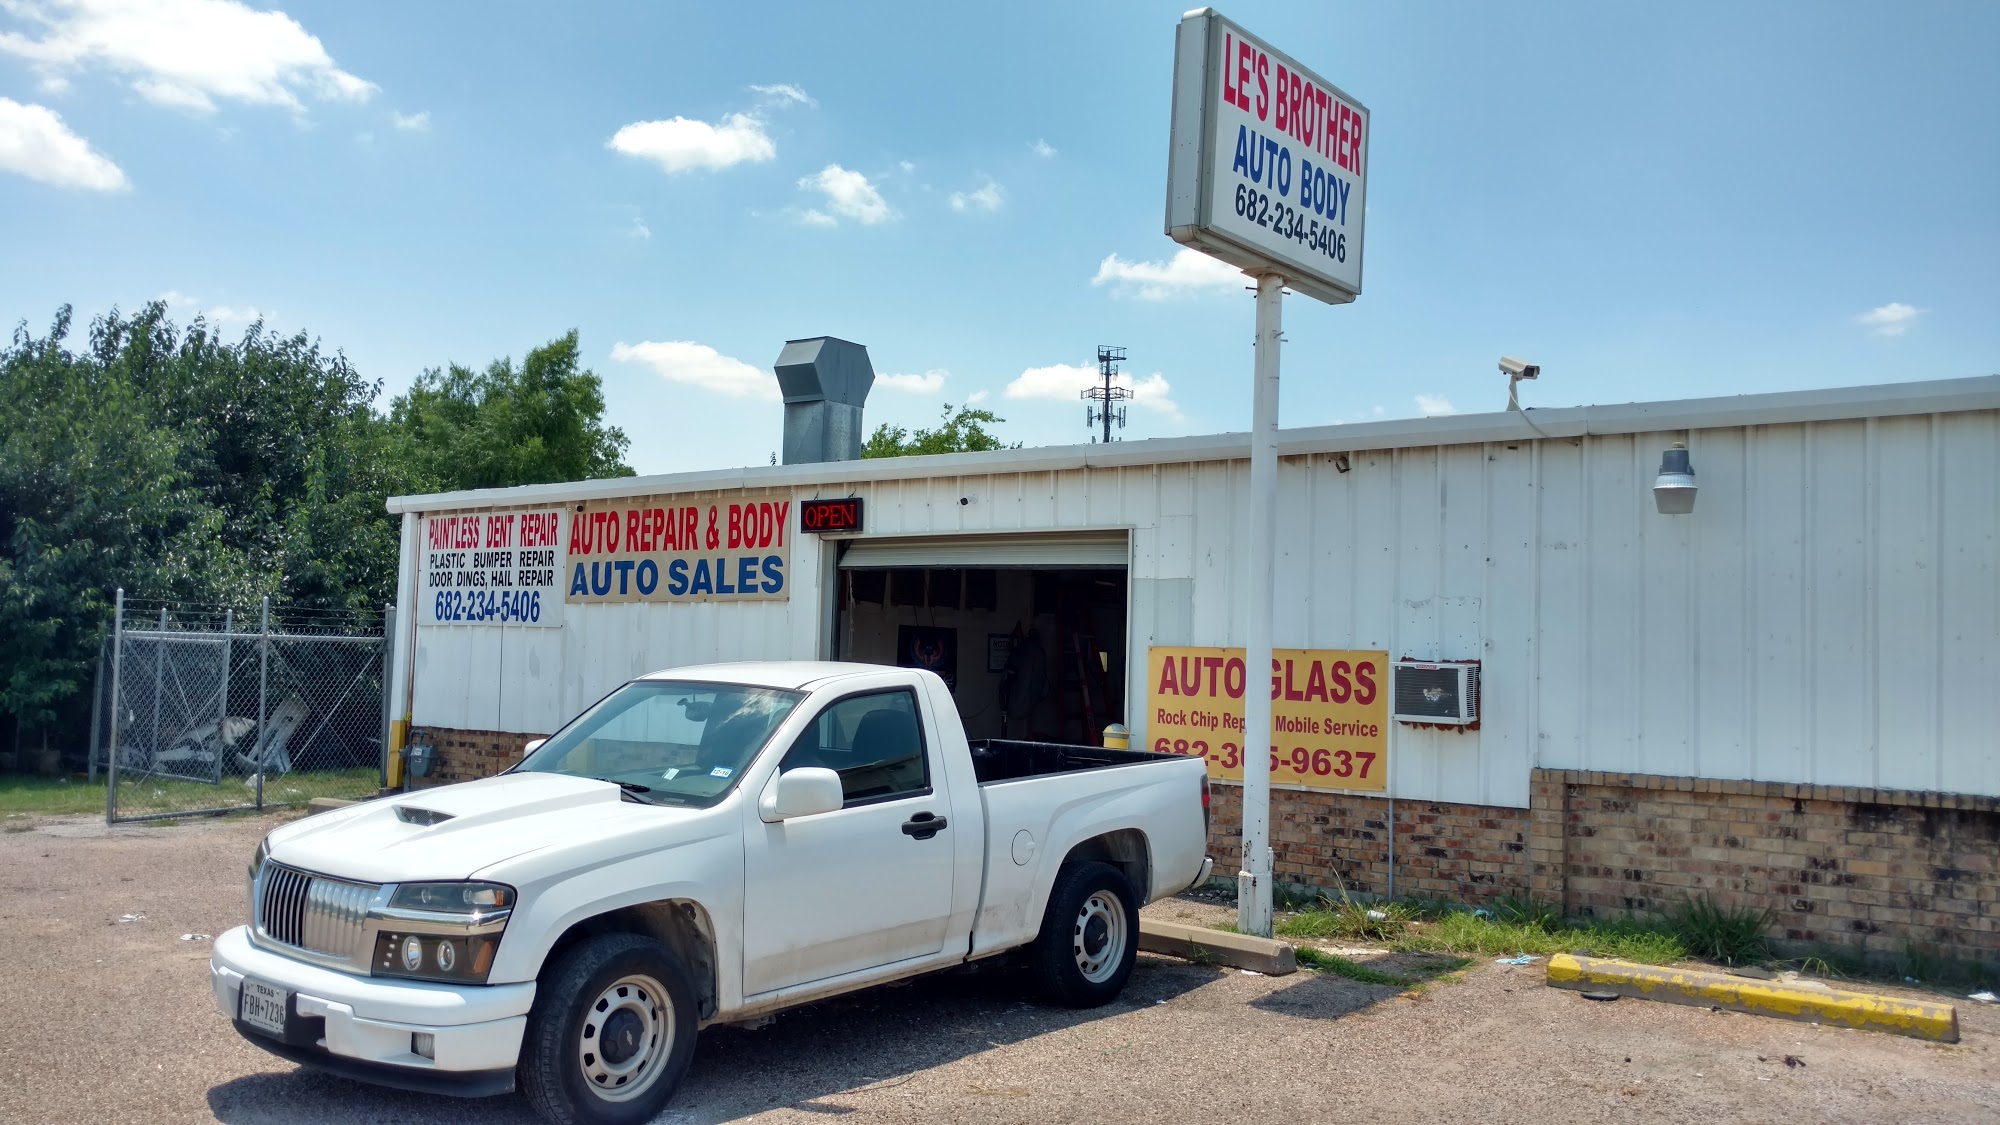 Le Brothers Auto Body & Sales